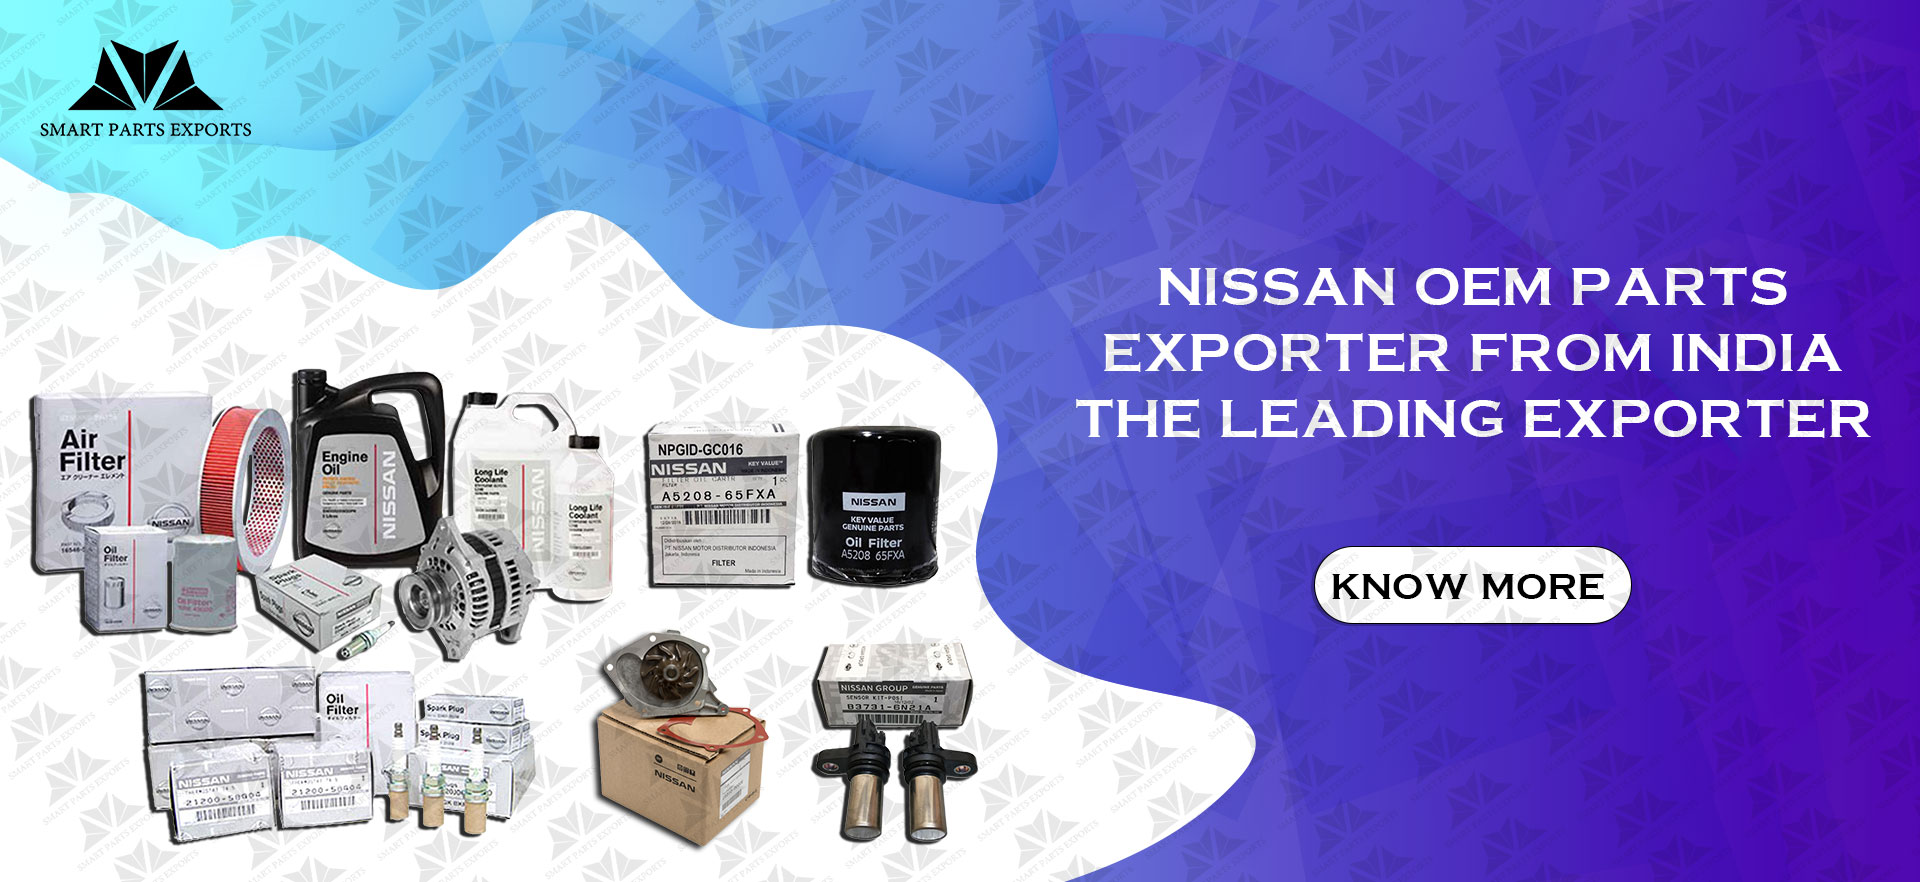 Nissan OEM Parts Exporter from India: The Leading Exporter